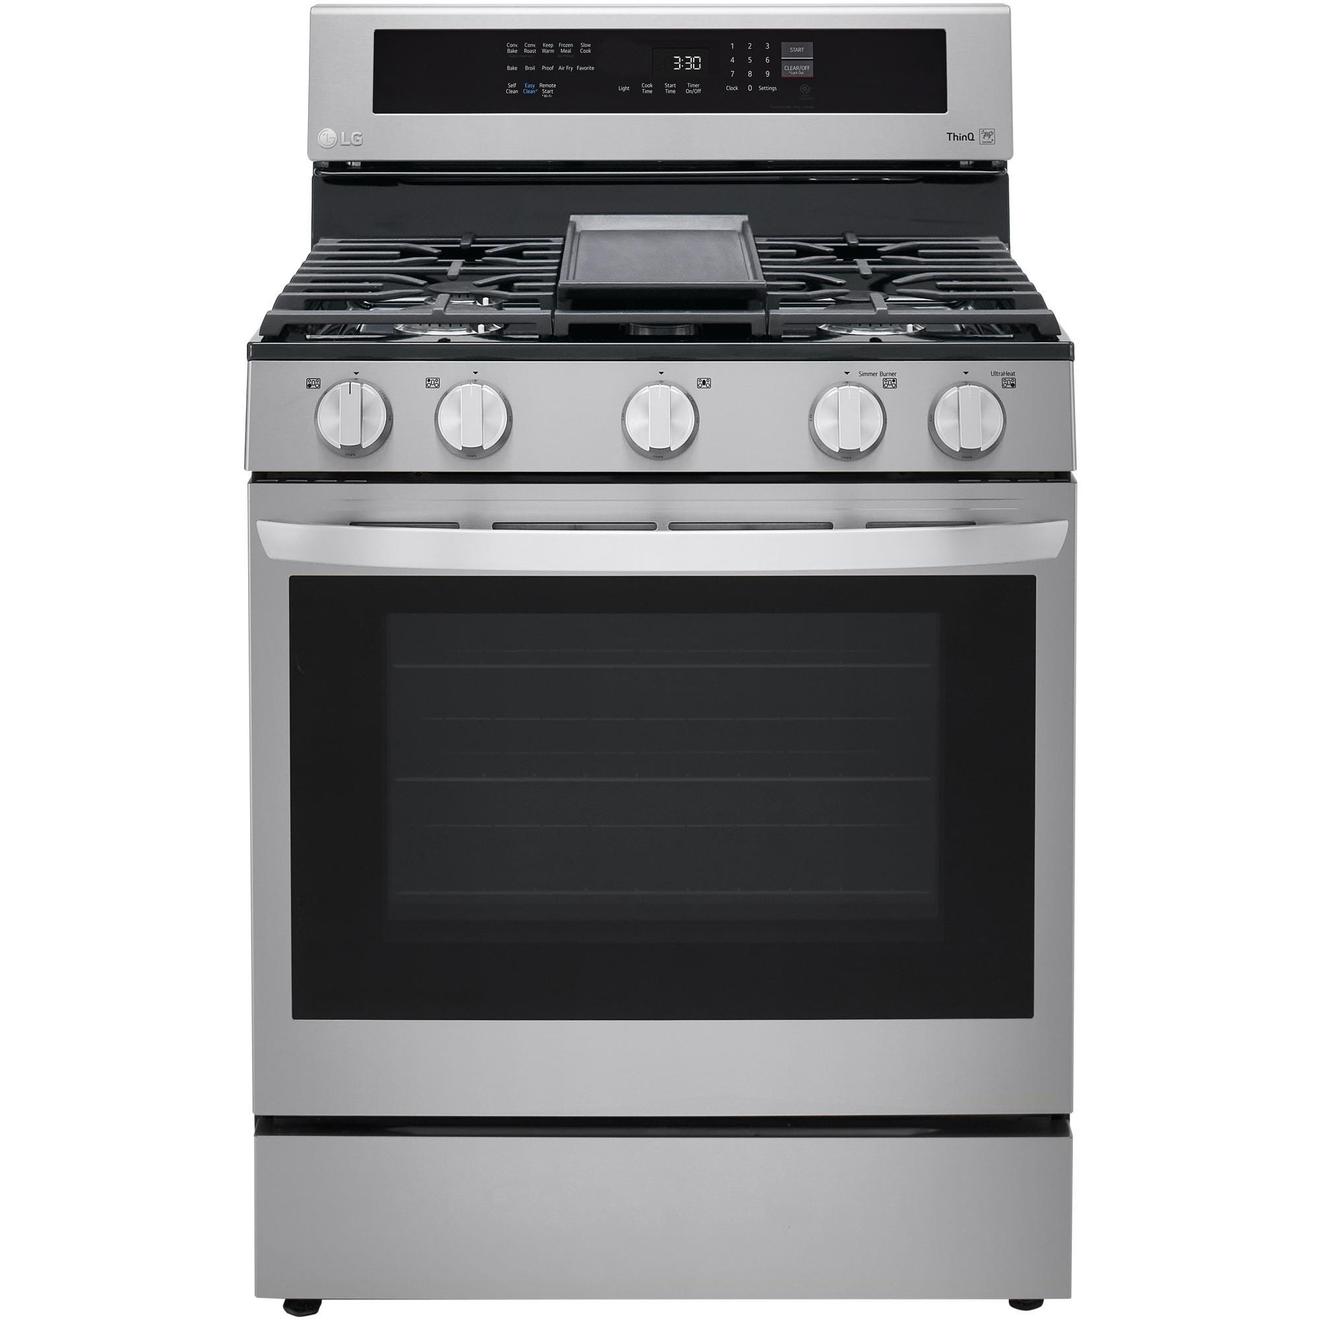 LG 30 inch Single Oven Gas Range offers at $1399.98 in Trail Appliances